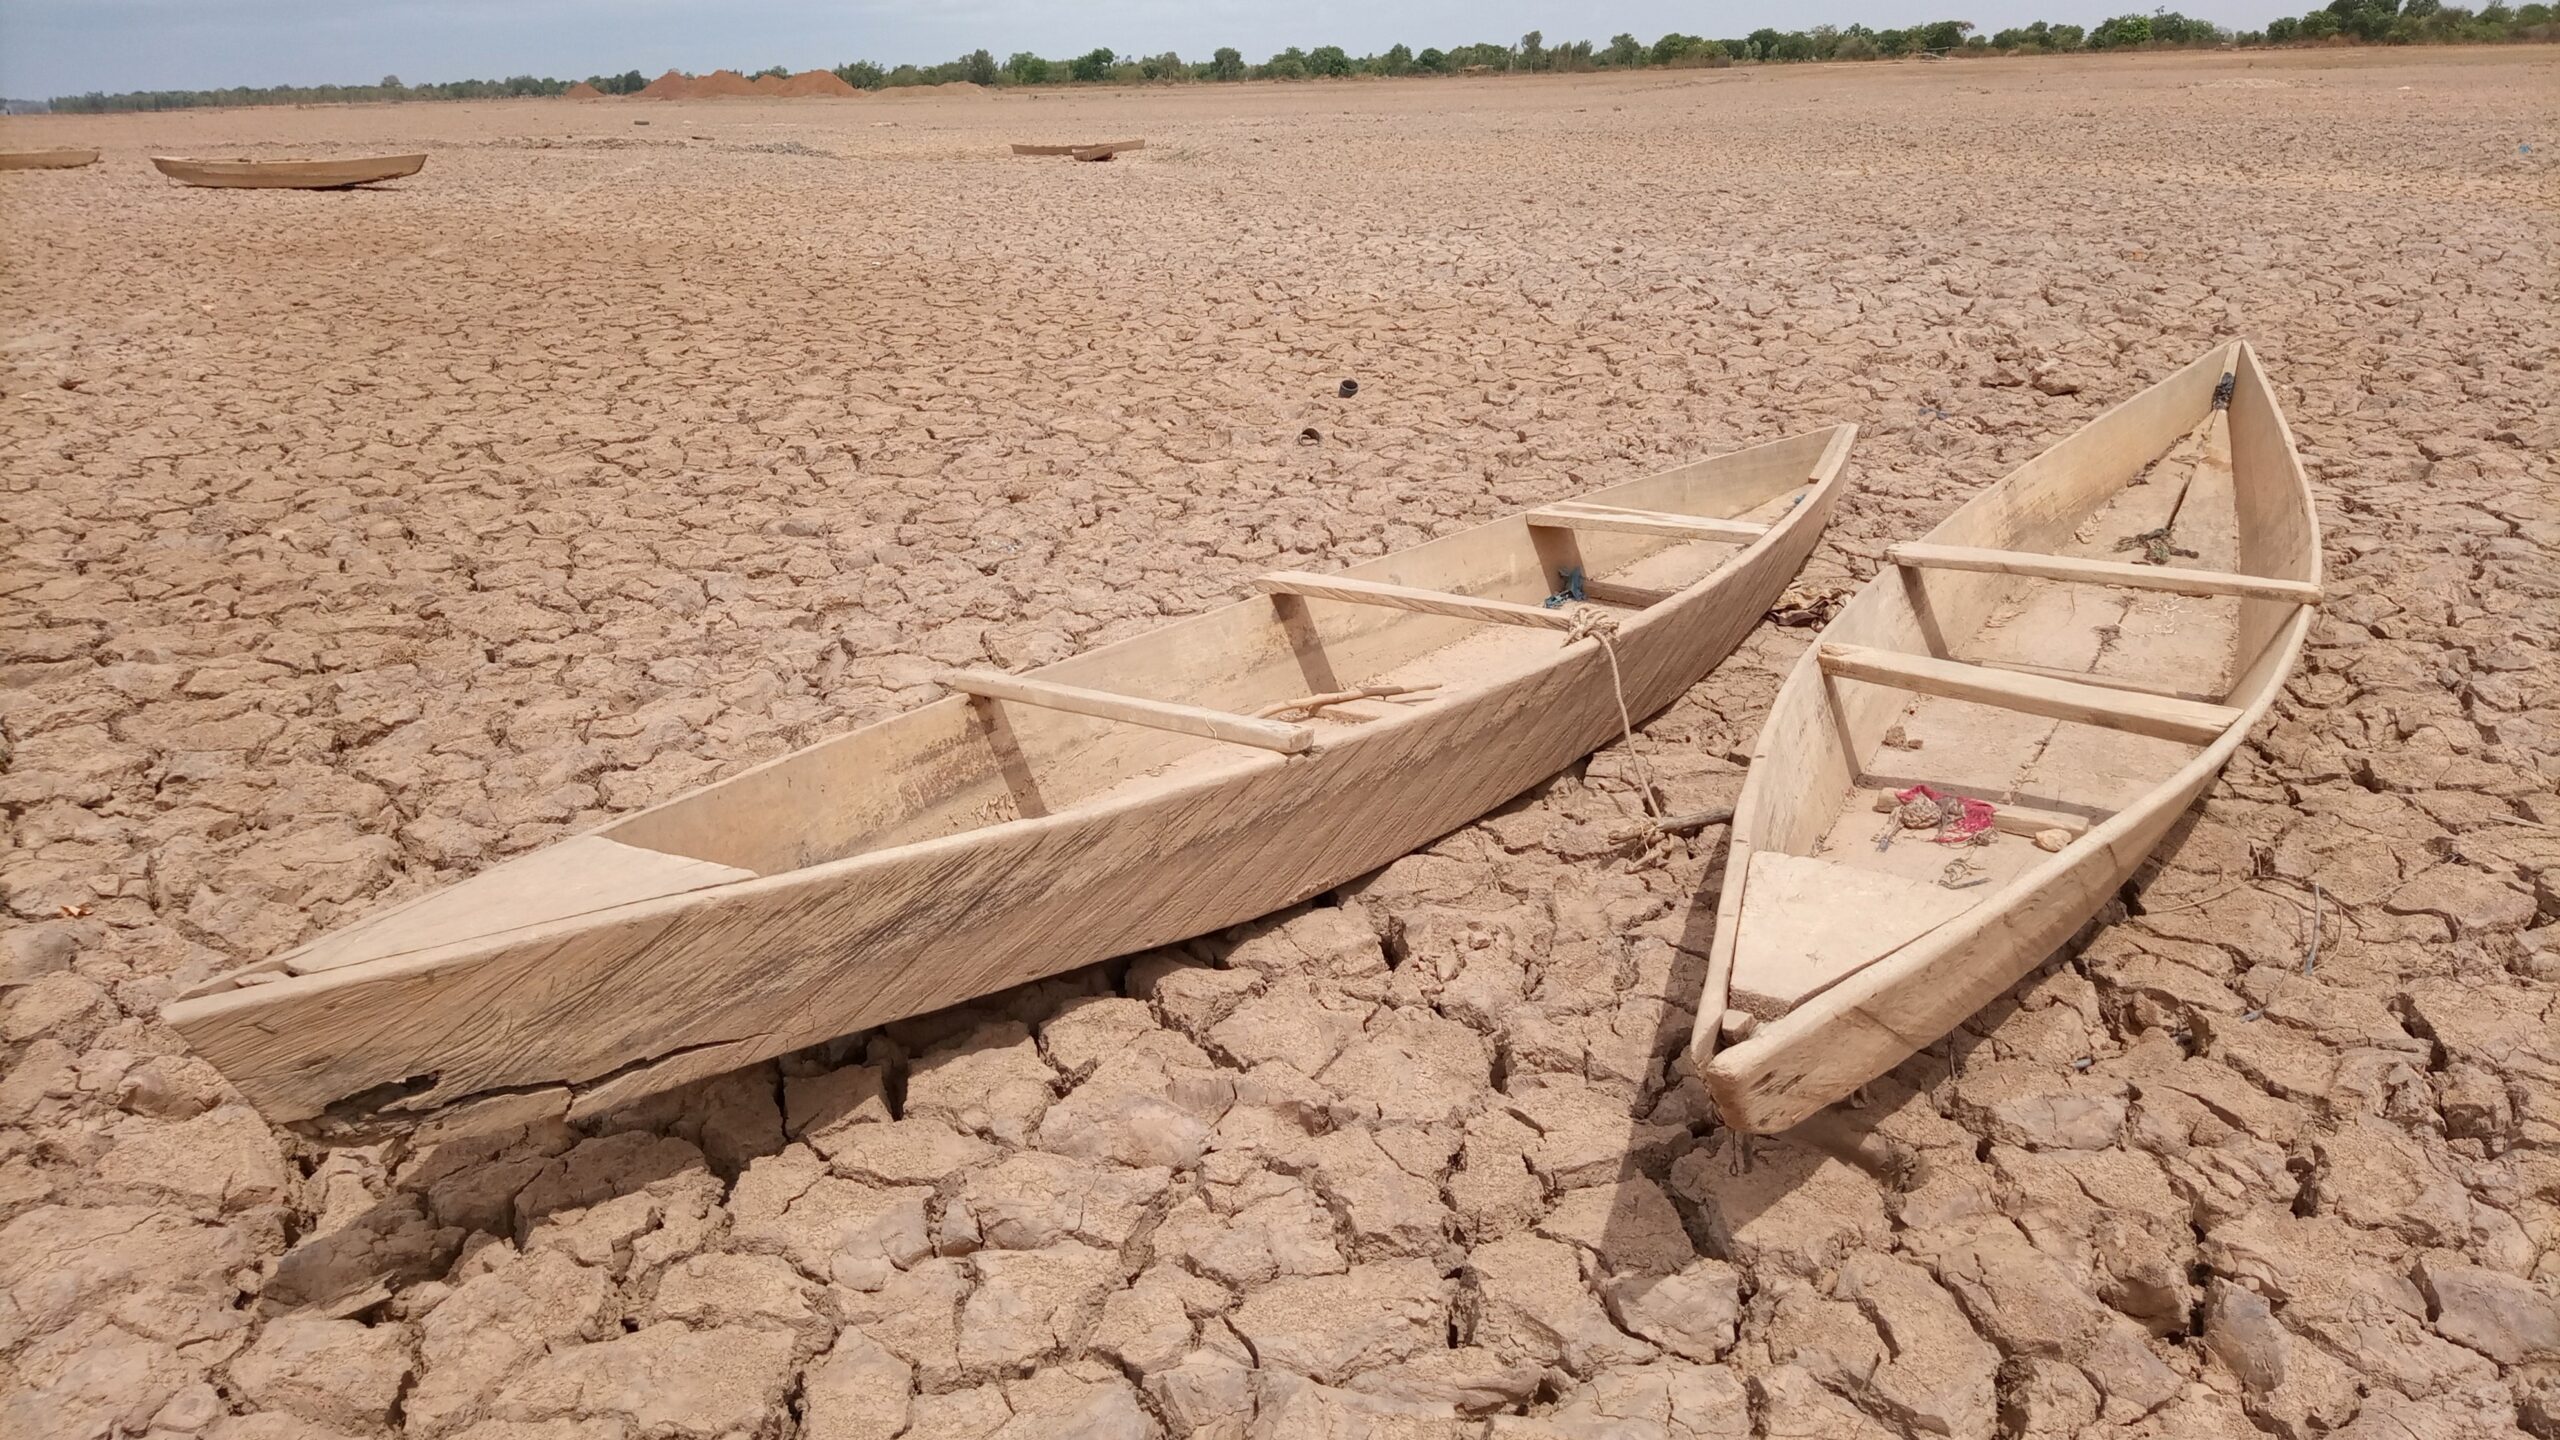 Two canoes in a dry lake bed in Burkina Faso.